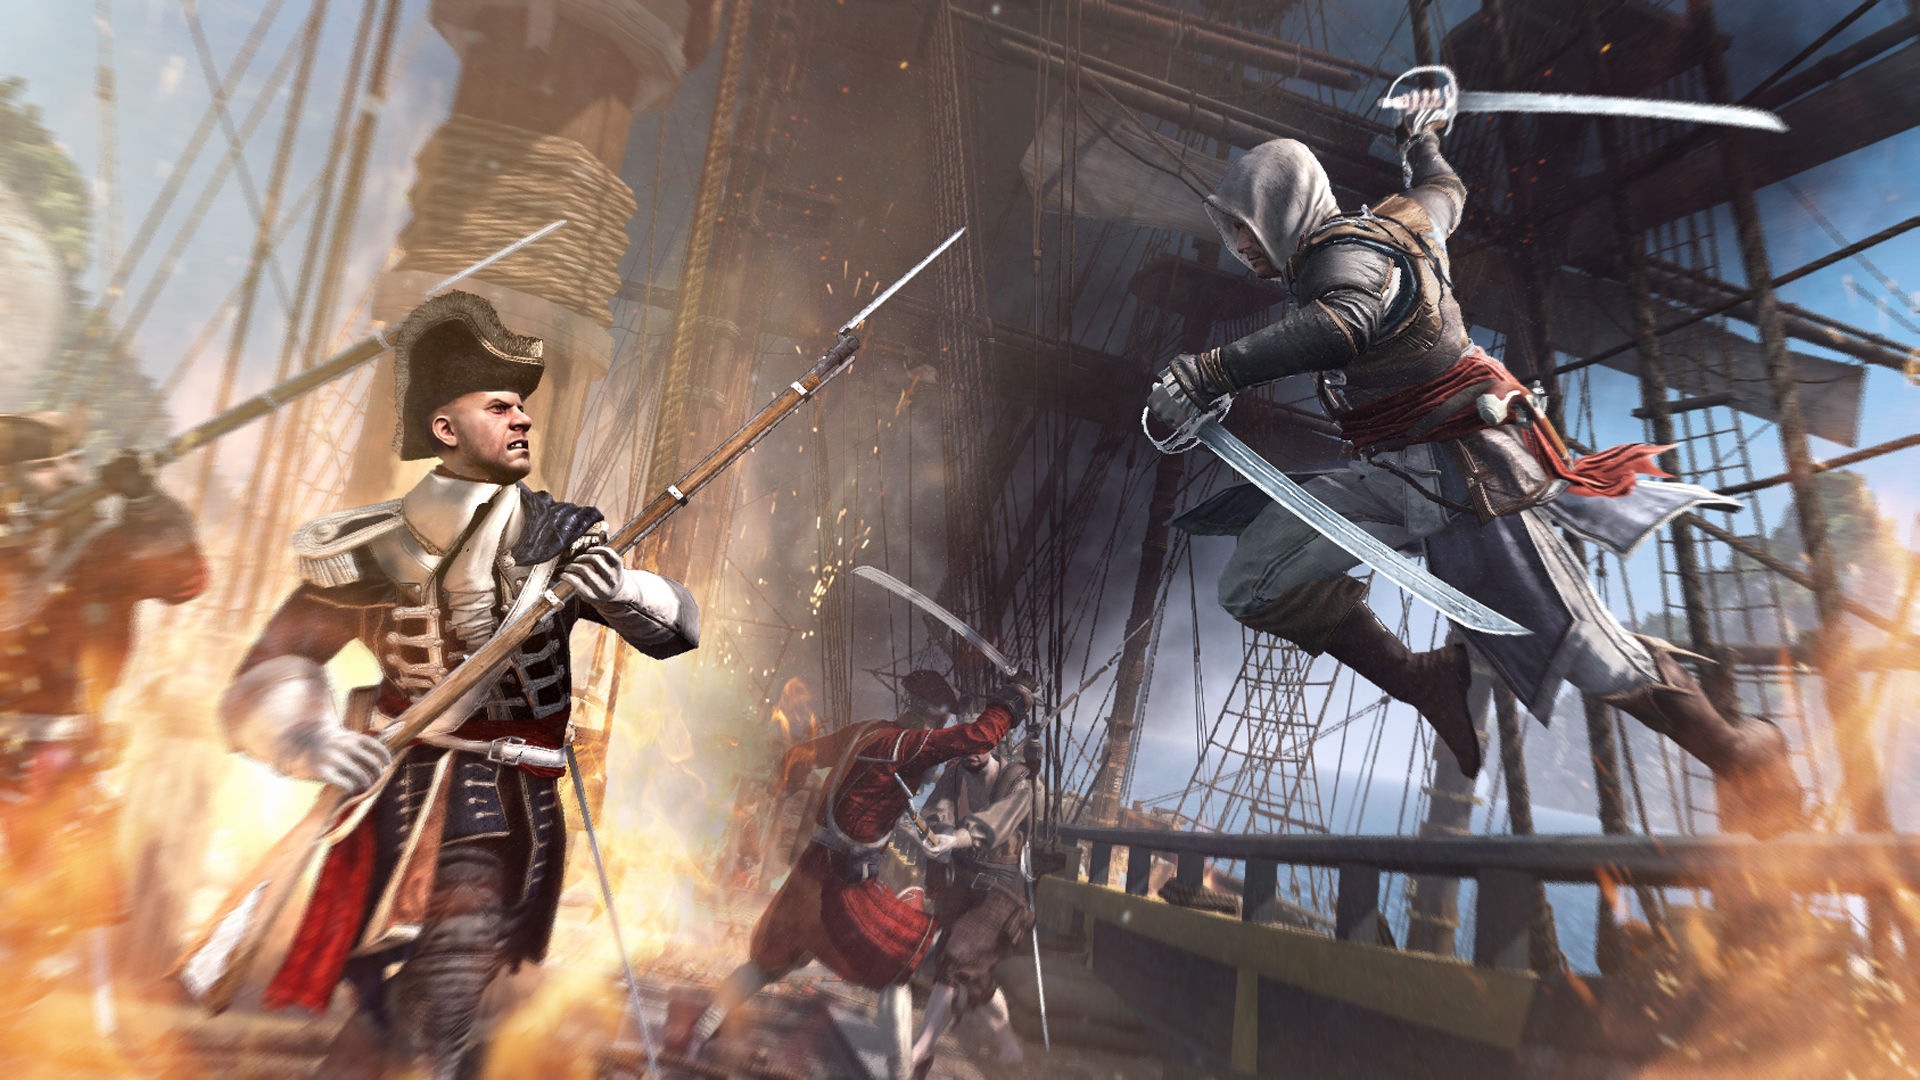 Creed IV Assassin: Black Flag HD wallpapers #12 - 1920x1080